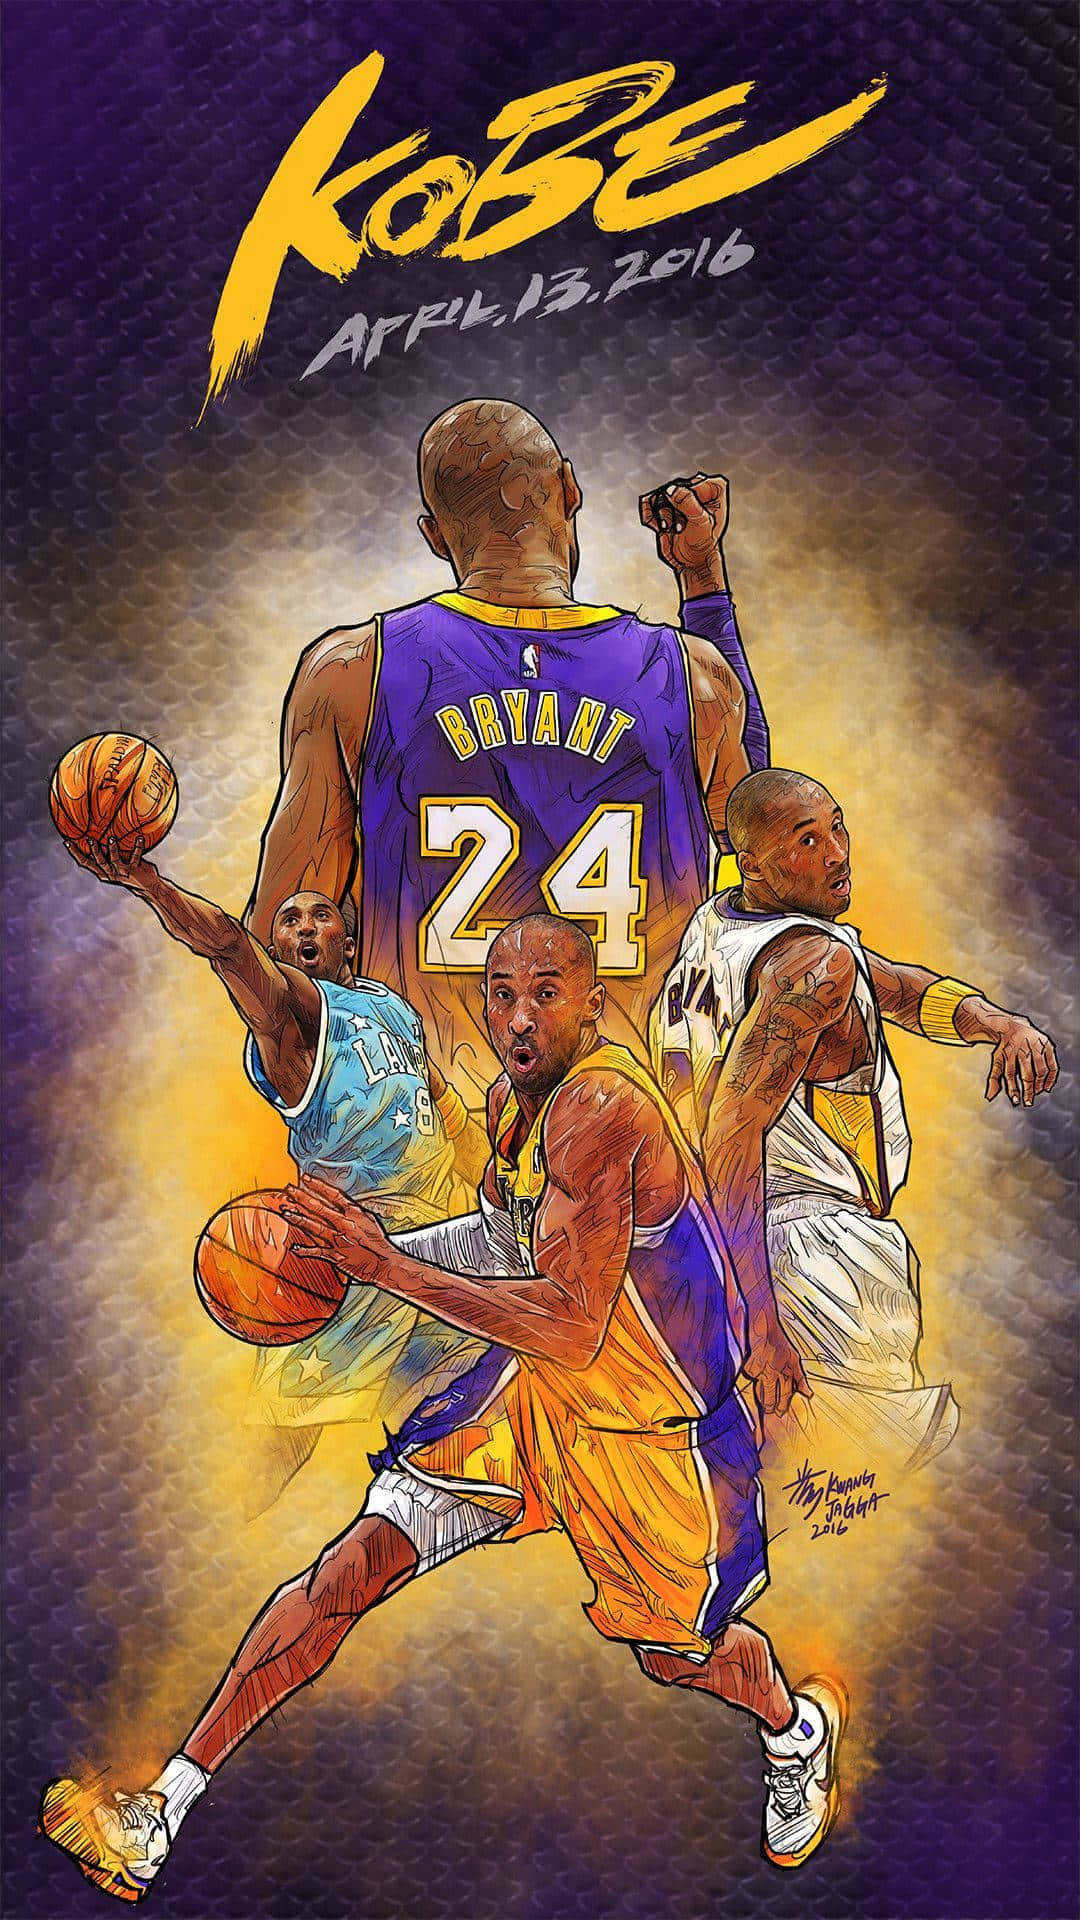 Kobe Wallpaper Discover more Android, Background, Galaxy, Iphone